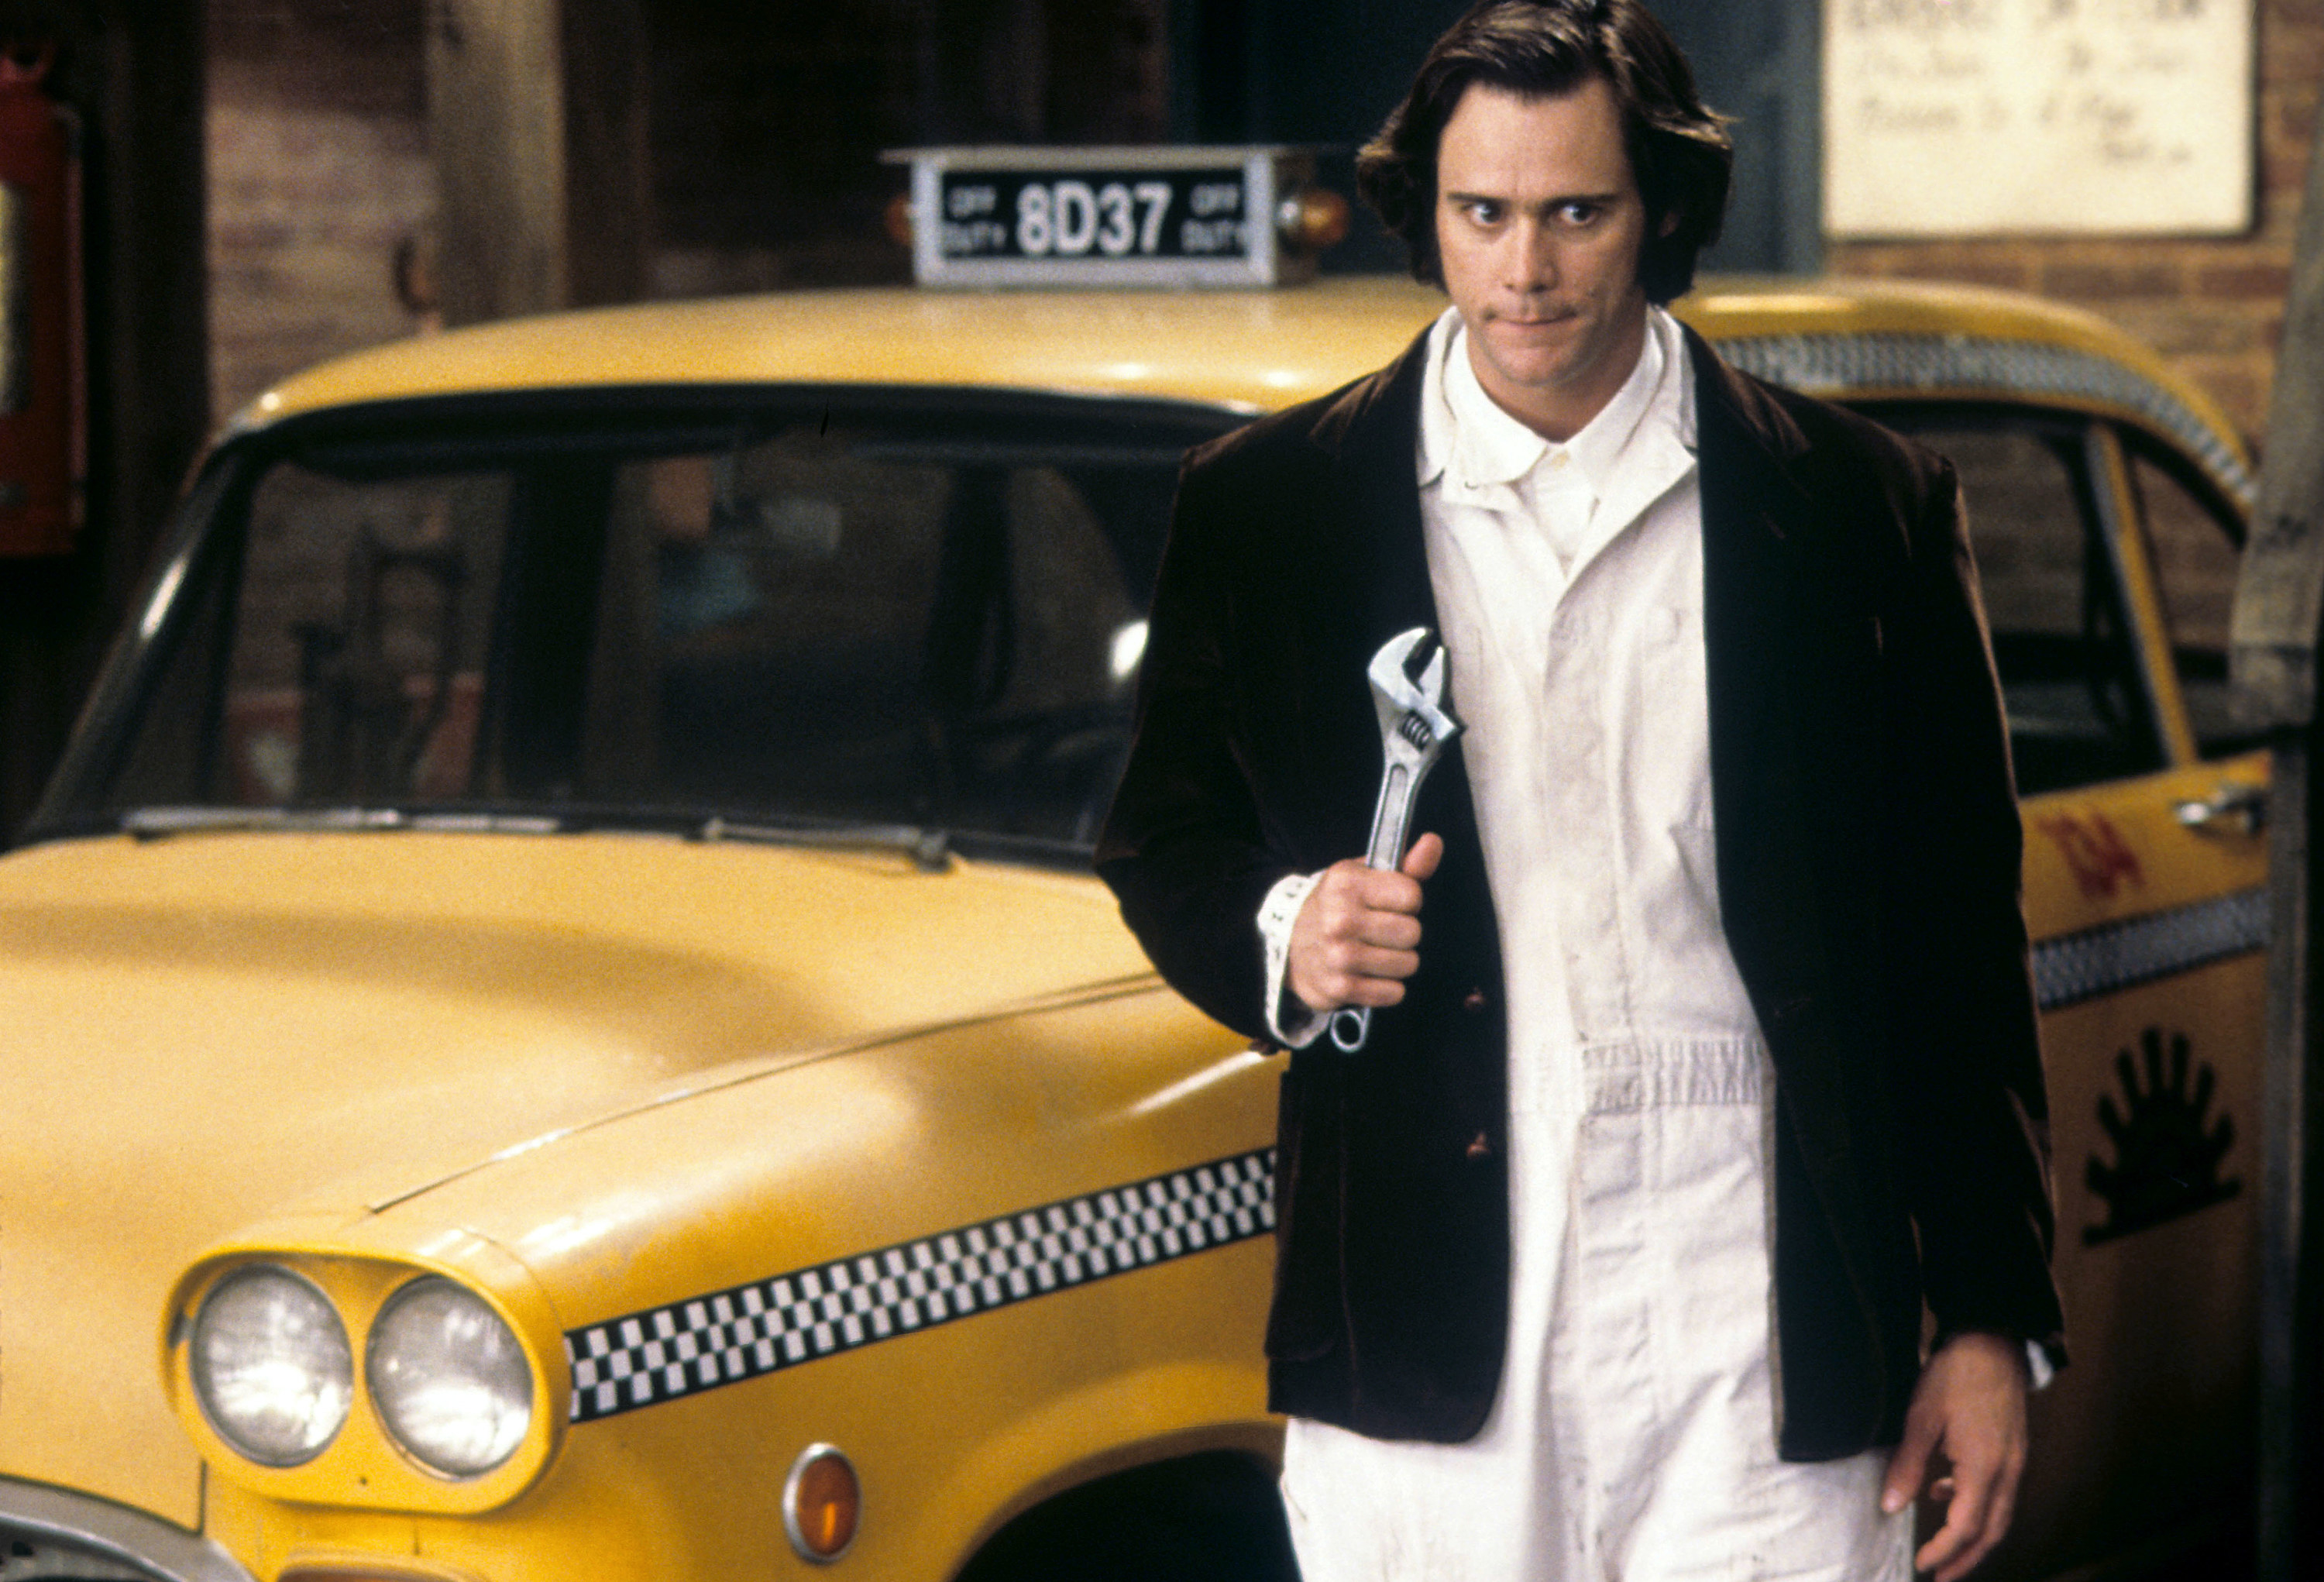 Jim Carrey as Andy Kaufman holding a wrench and standing by a cab